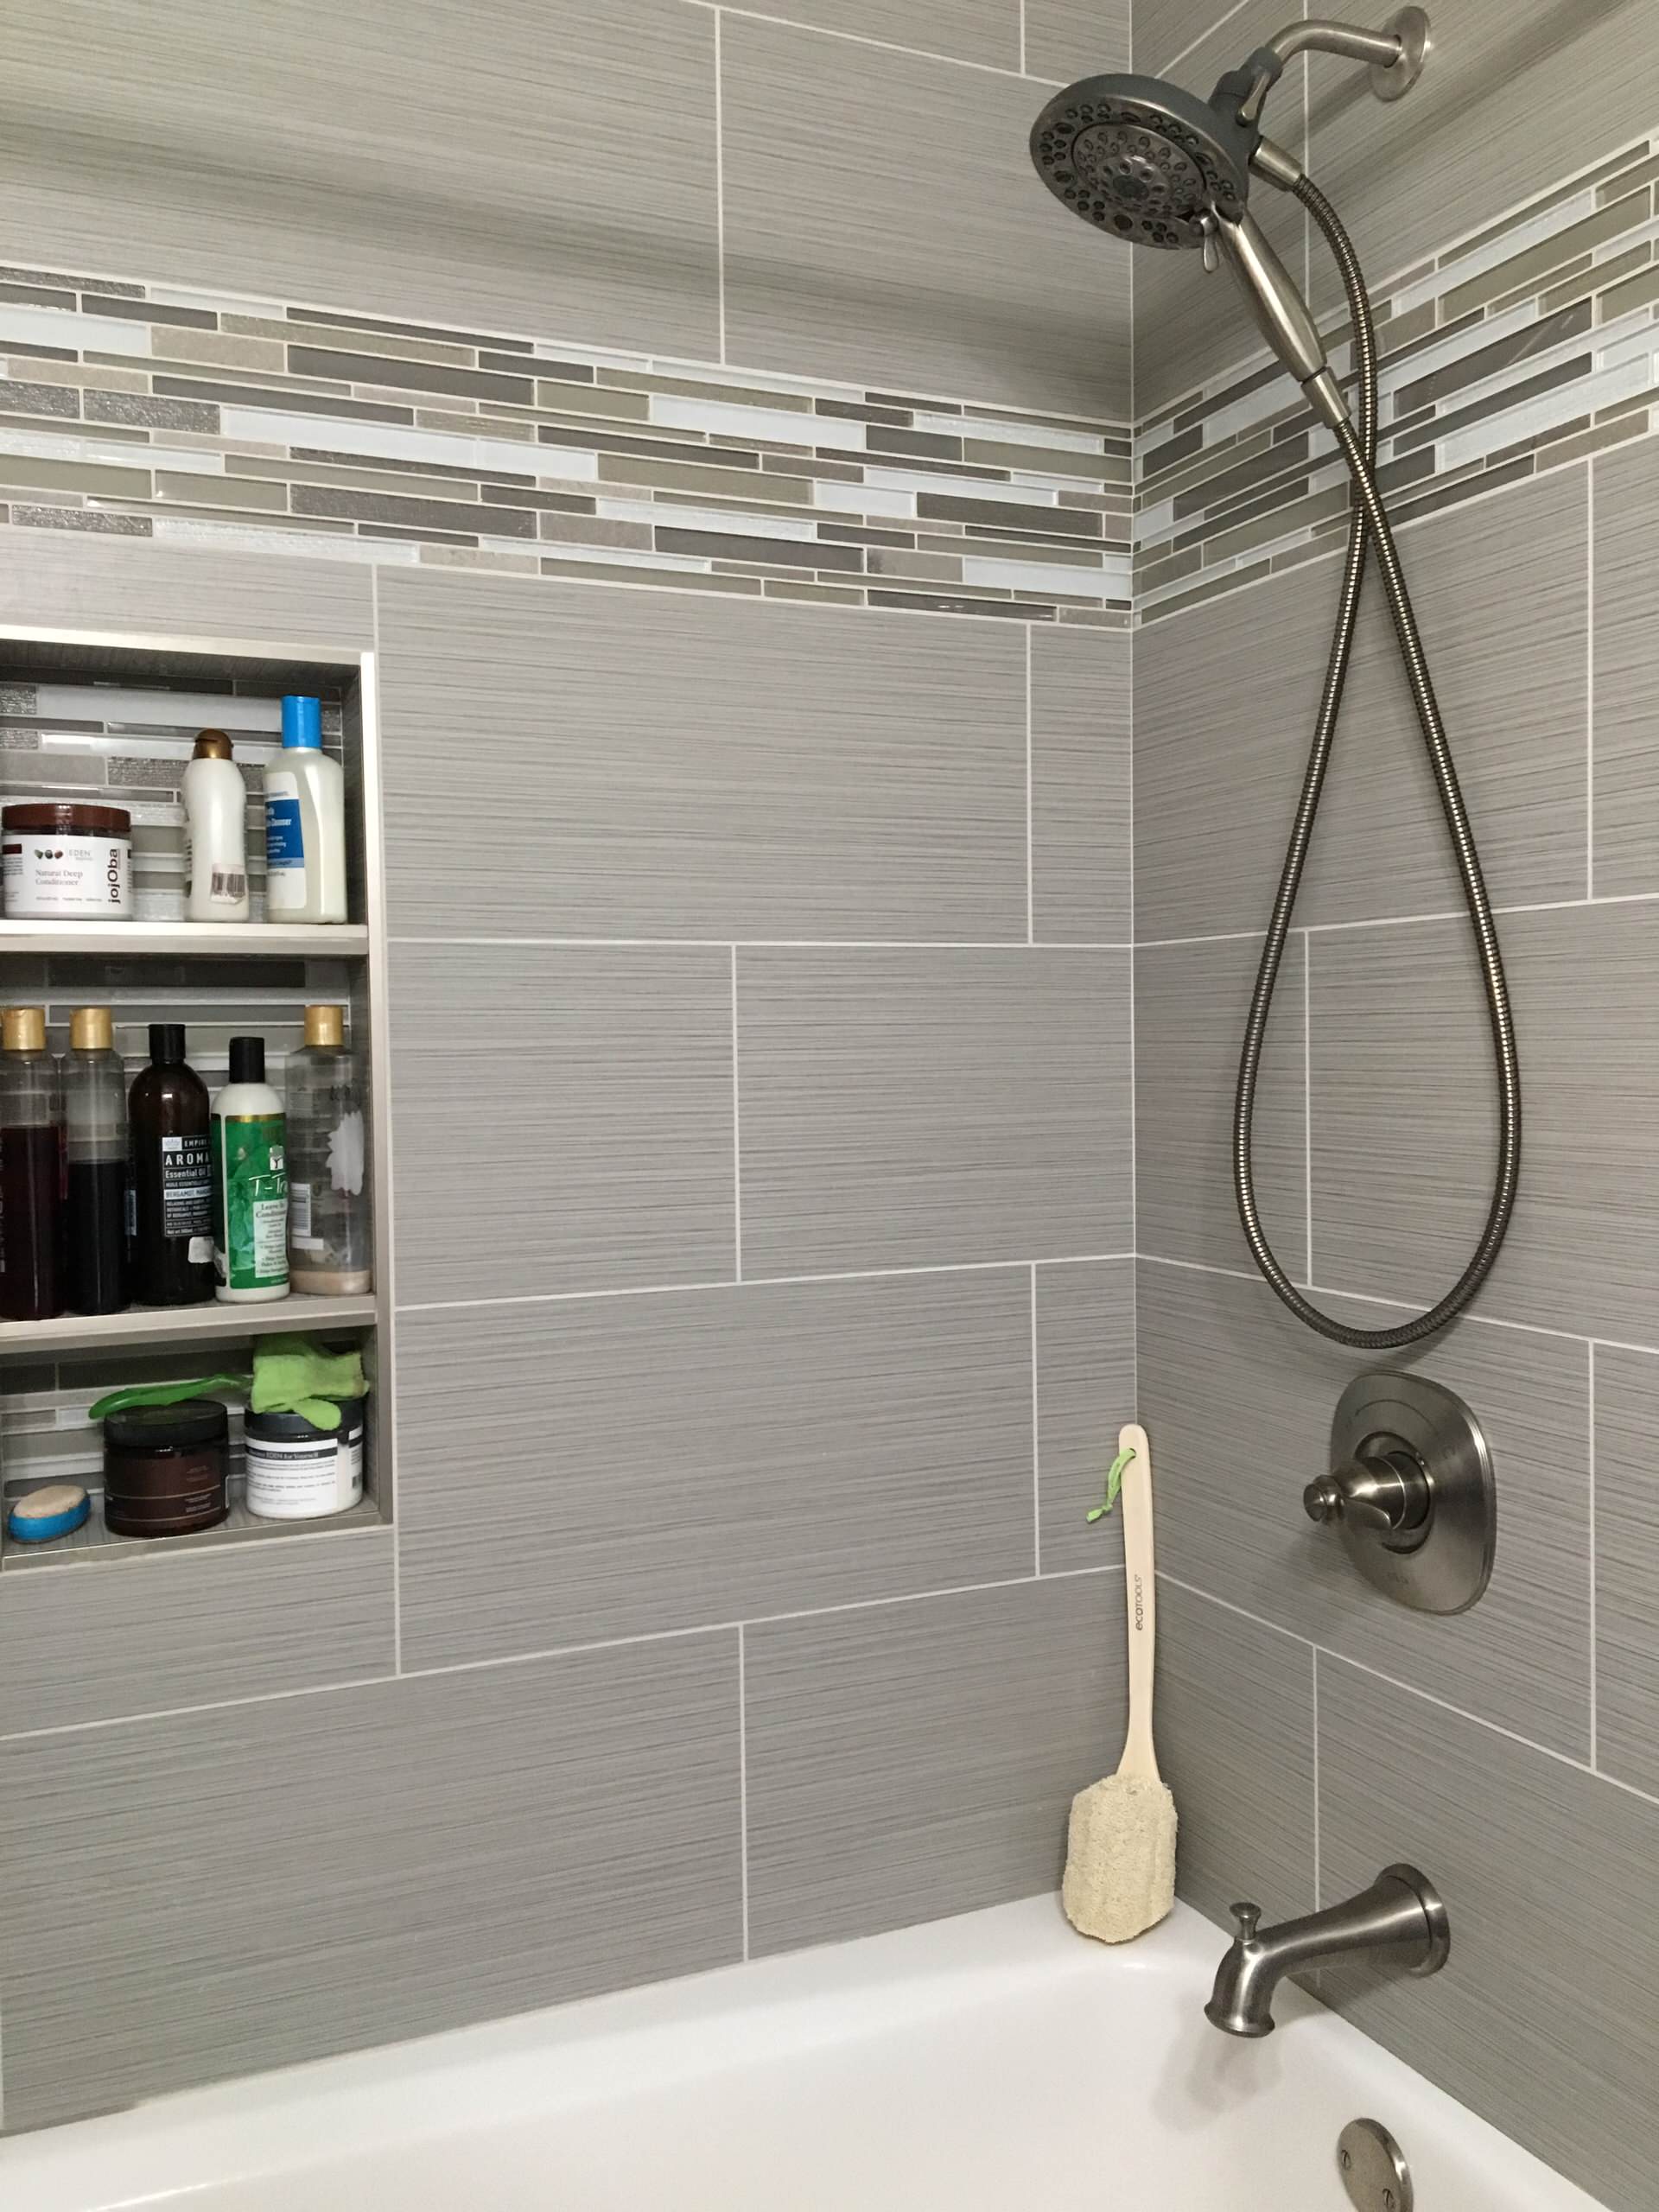 Large 12x24 Wall Tile in Monochromatic Colorway Update the Tub/Shower Combo